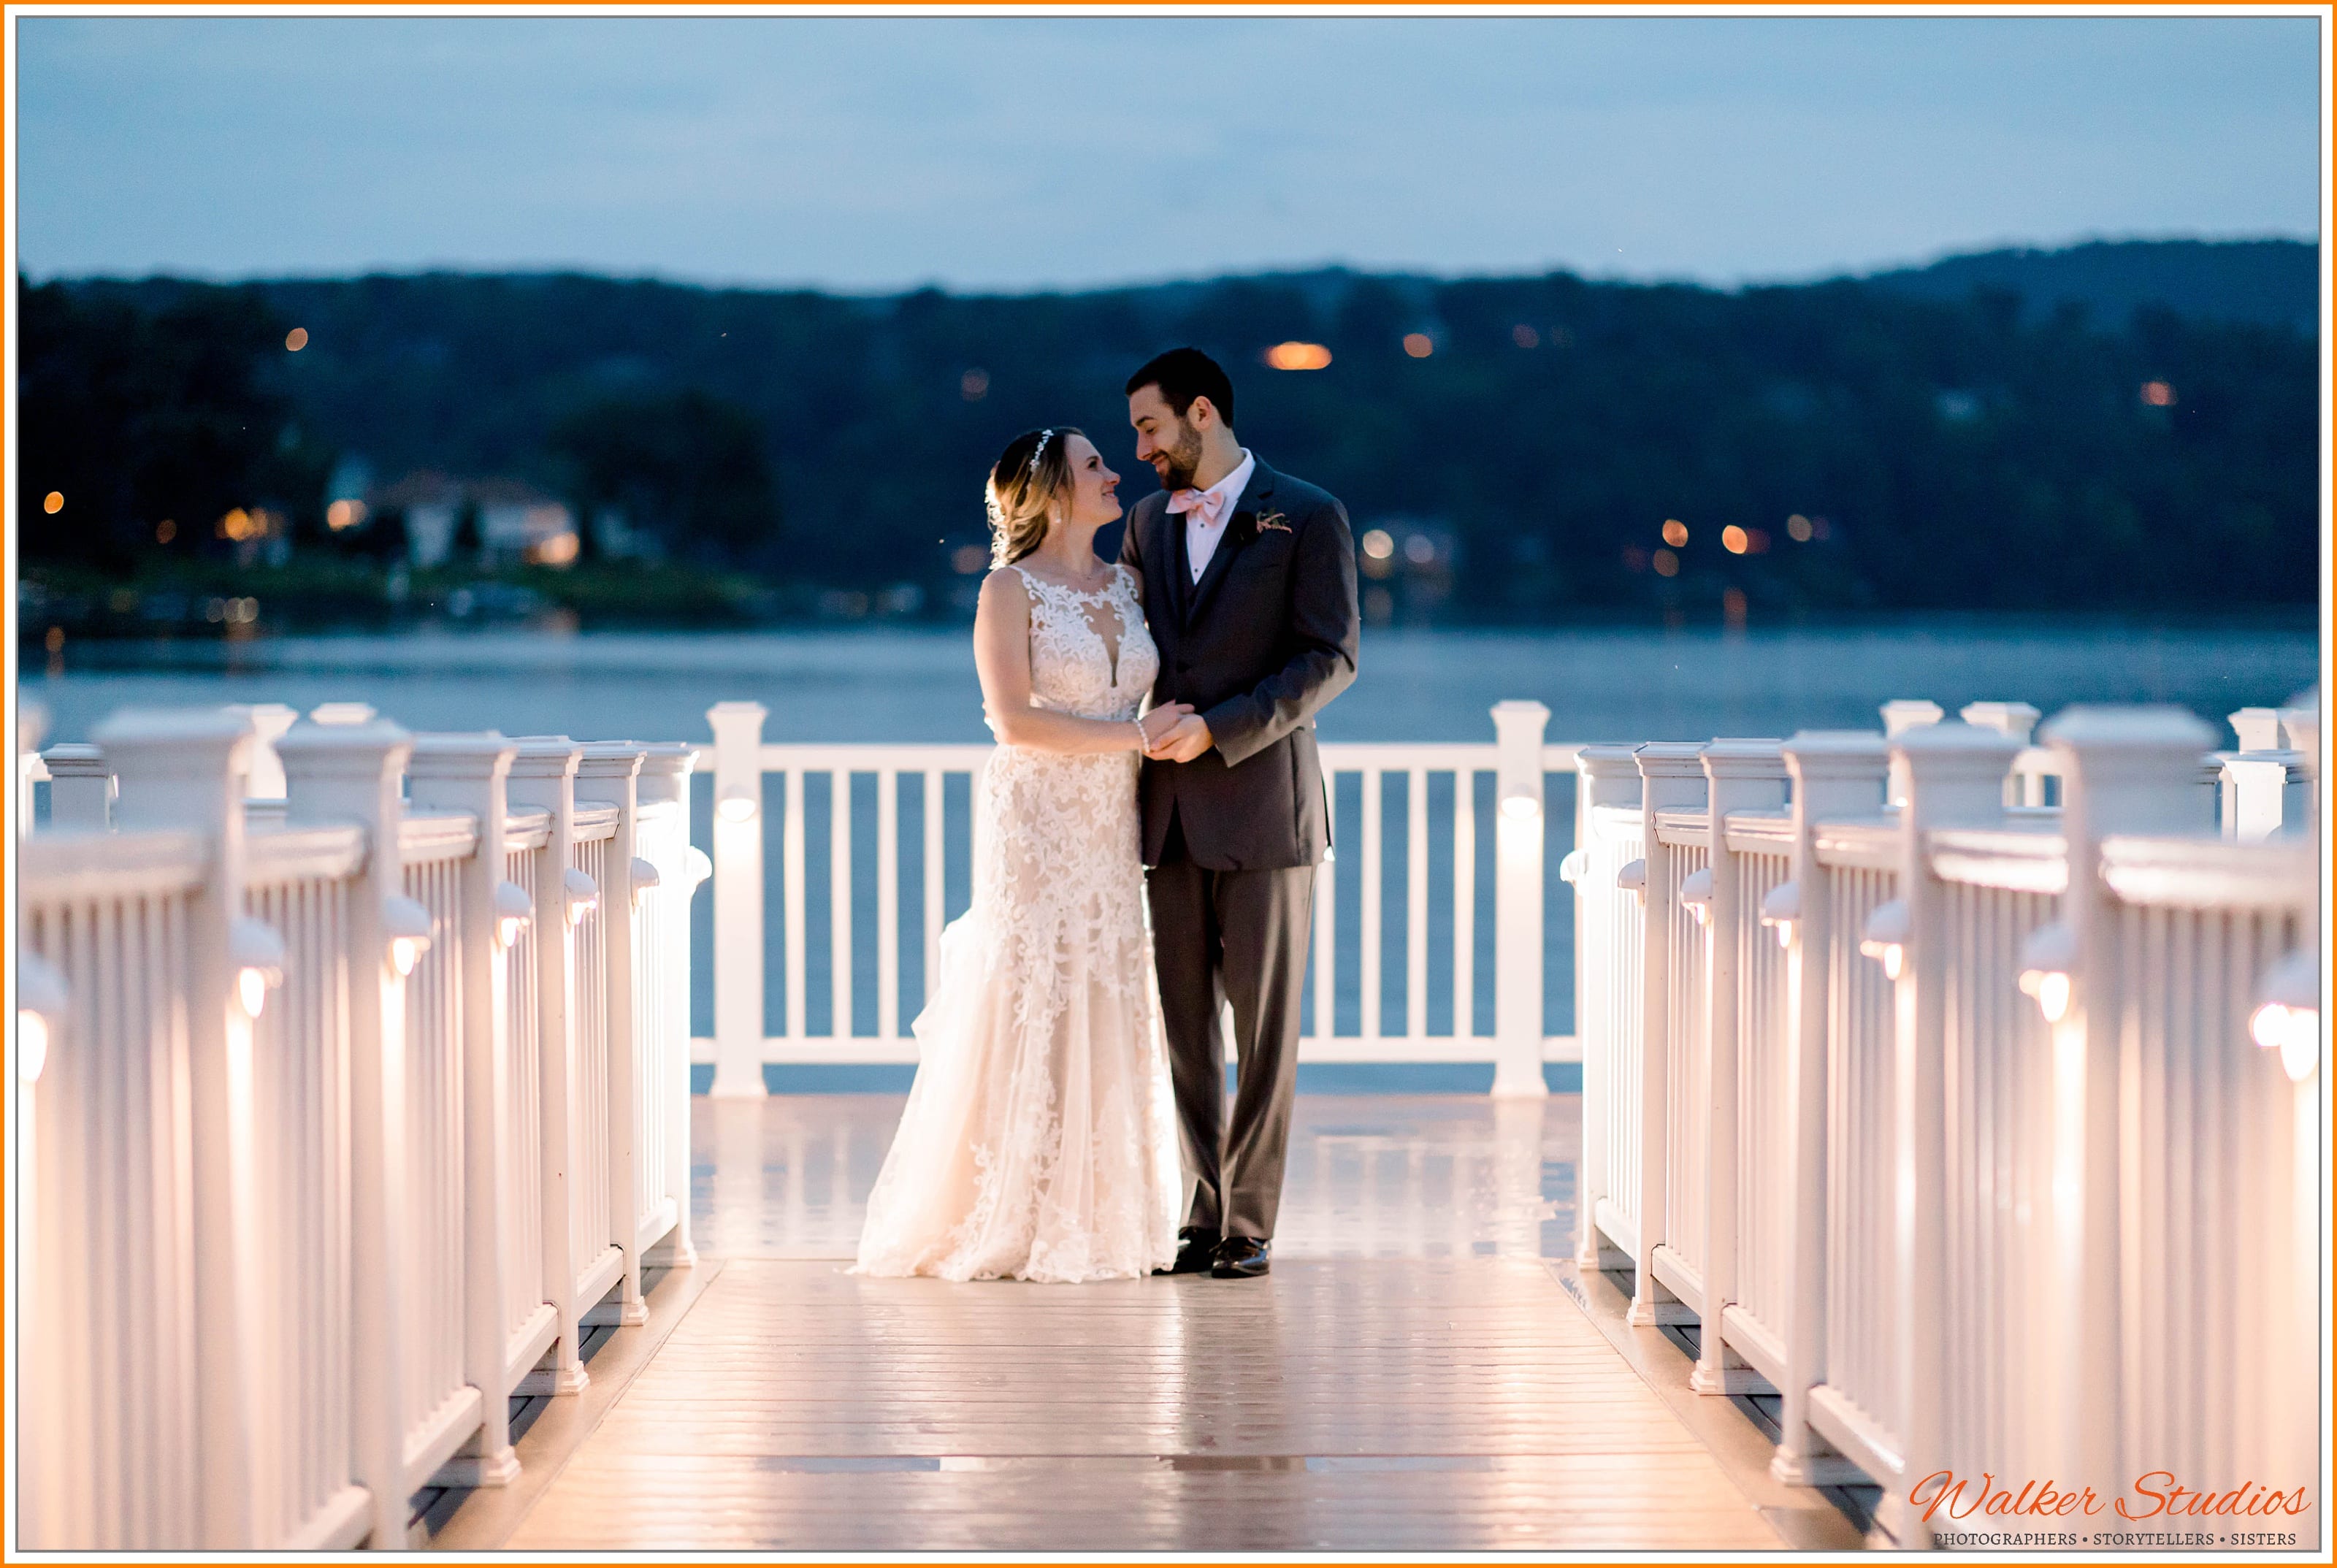 Connecticut Nautical Summer Wedding at the Candlewood Inn photographed by Walker Studios LLC .